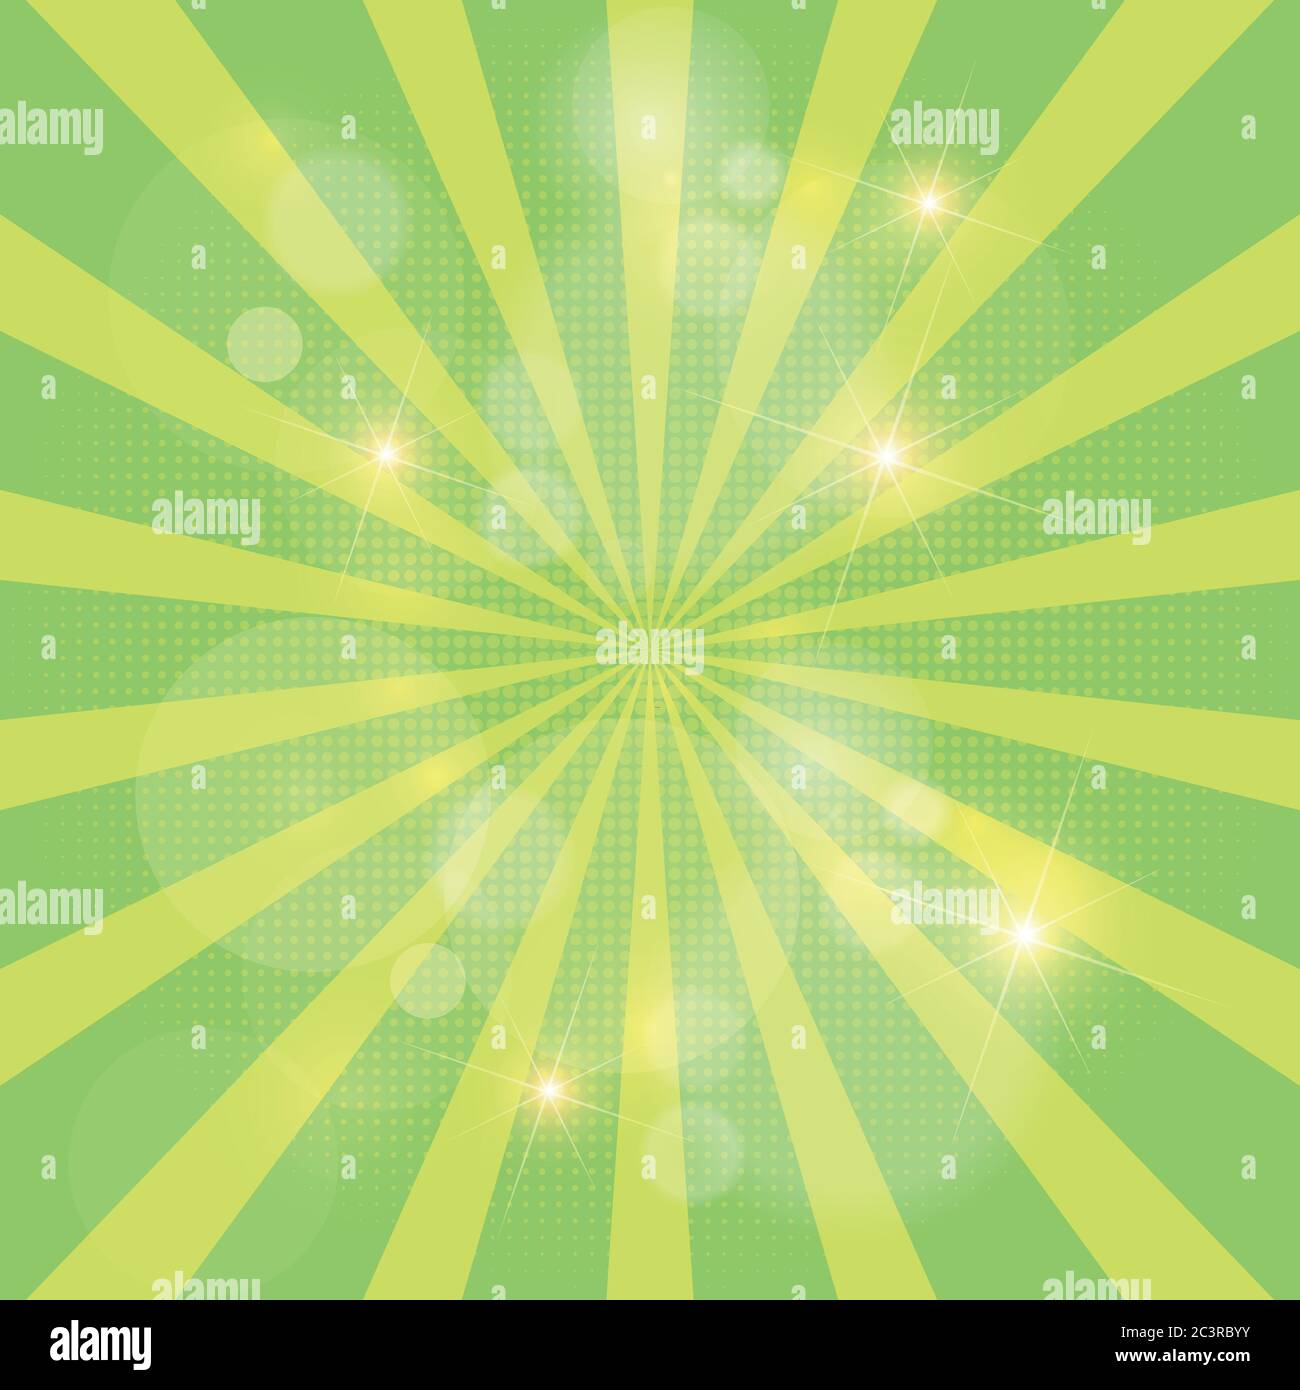 Abstract Background With Sun Rays Vector Stock Vector Image Art Alamy